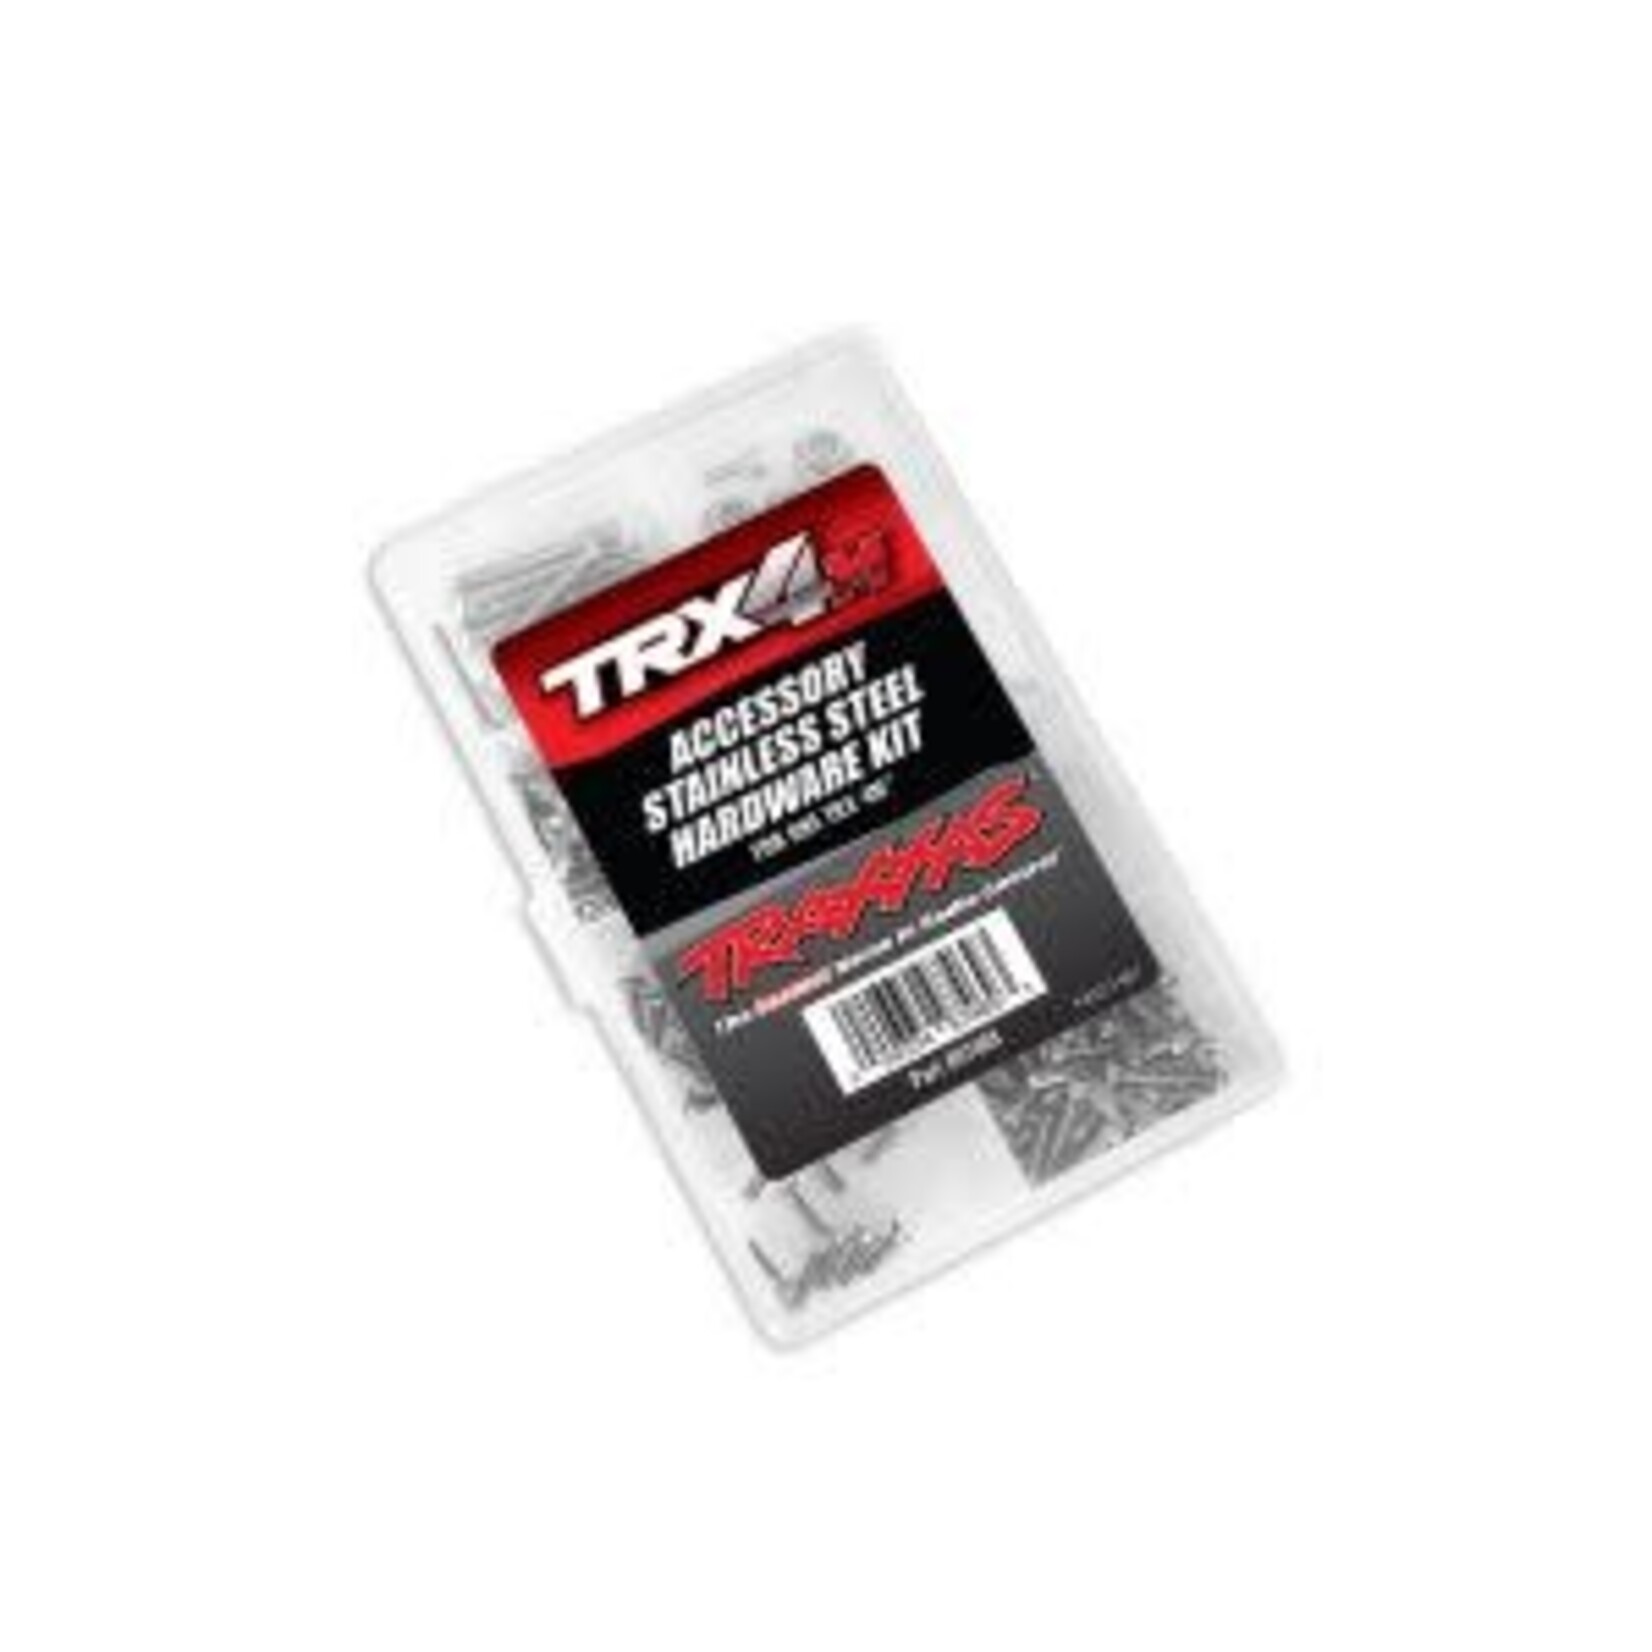 Traxxas 9746X  Hardware kit, stainless steel, complete (contains all stainless steel hardware used on 1/18-scle Ford Bronco or Land Rover® Defender®)